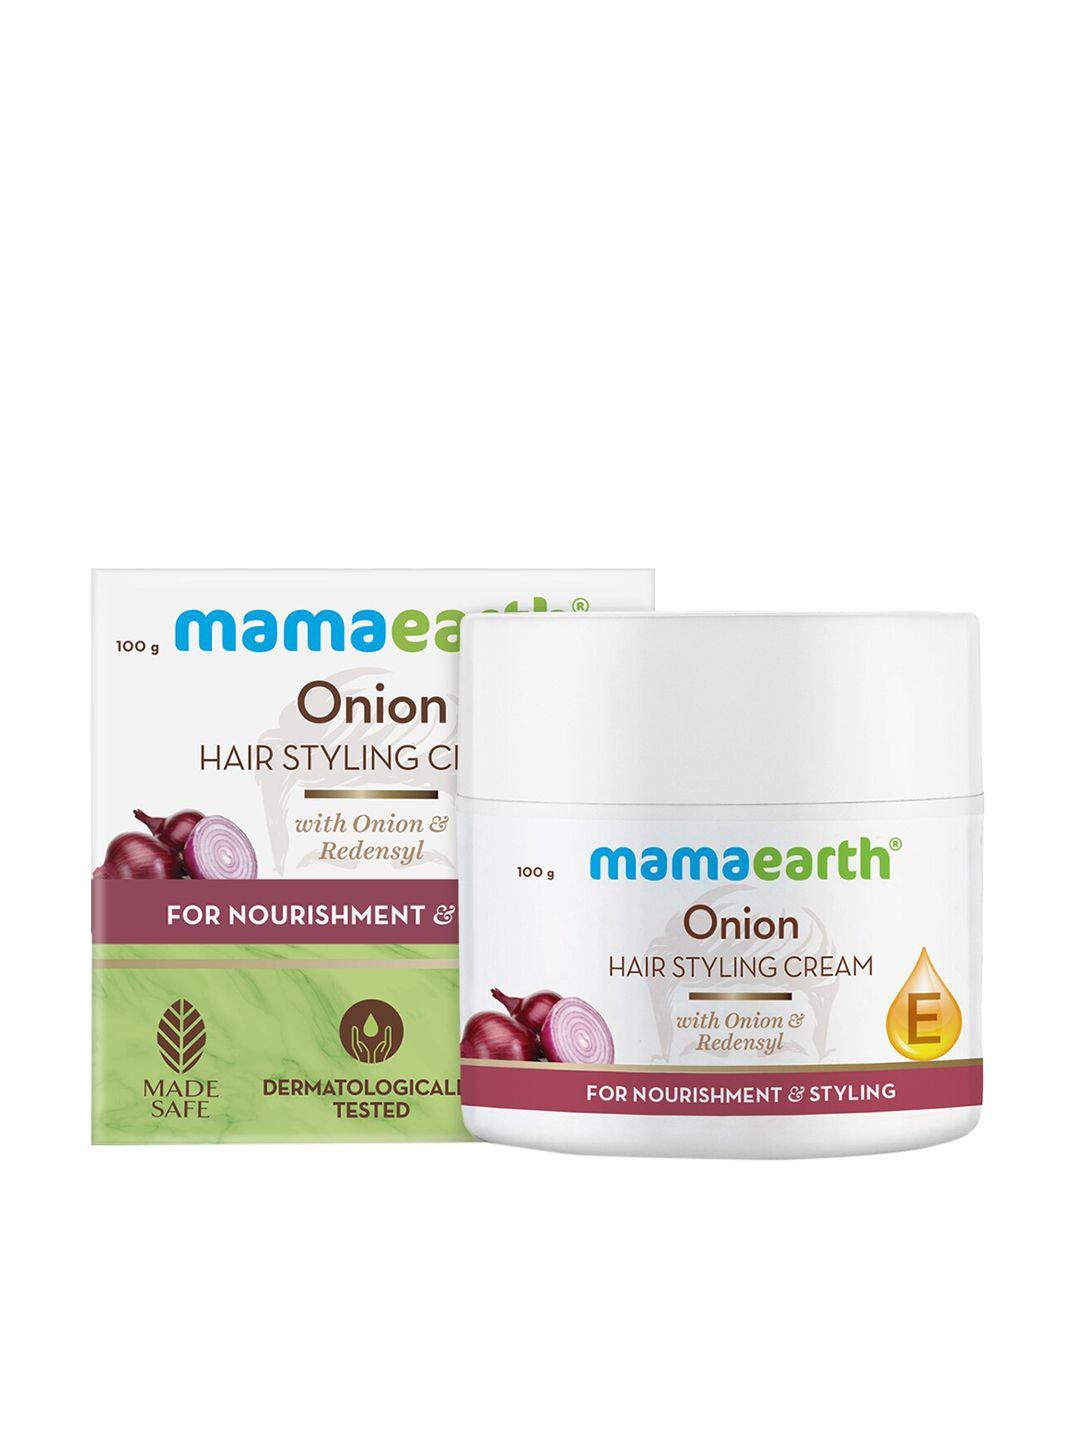 mamaearth onion hair styling cream with redensyl 100 g